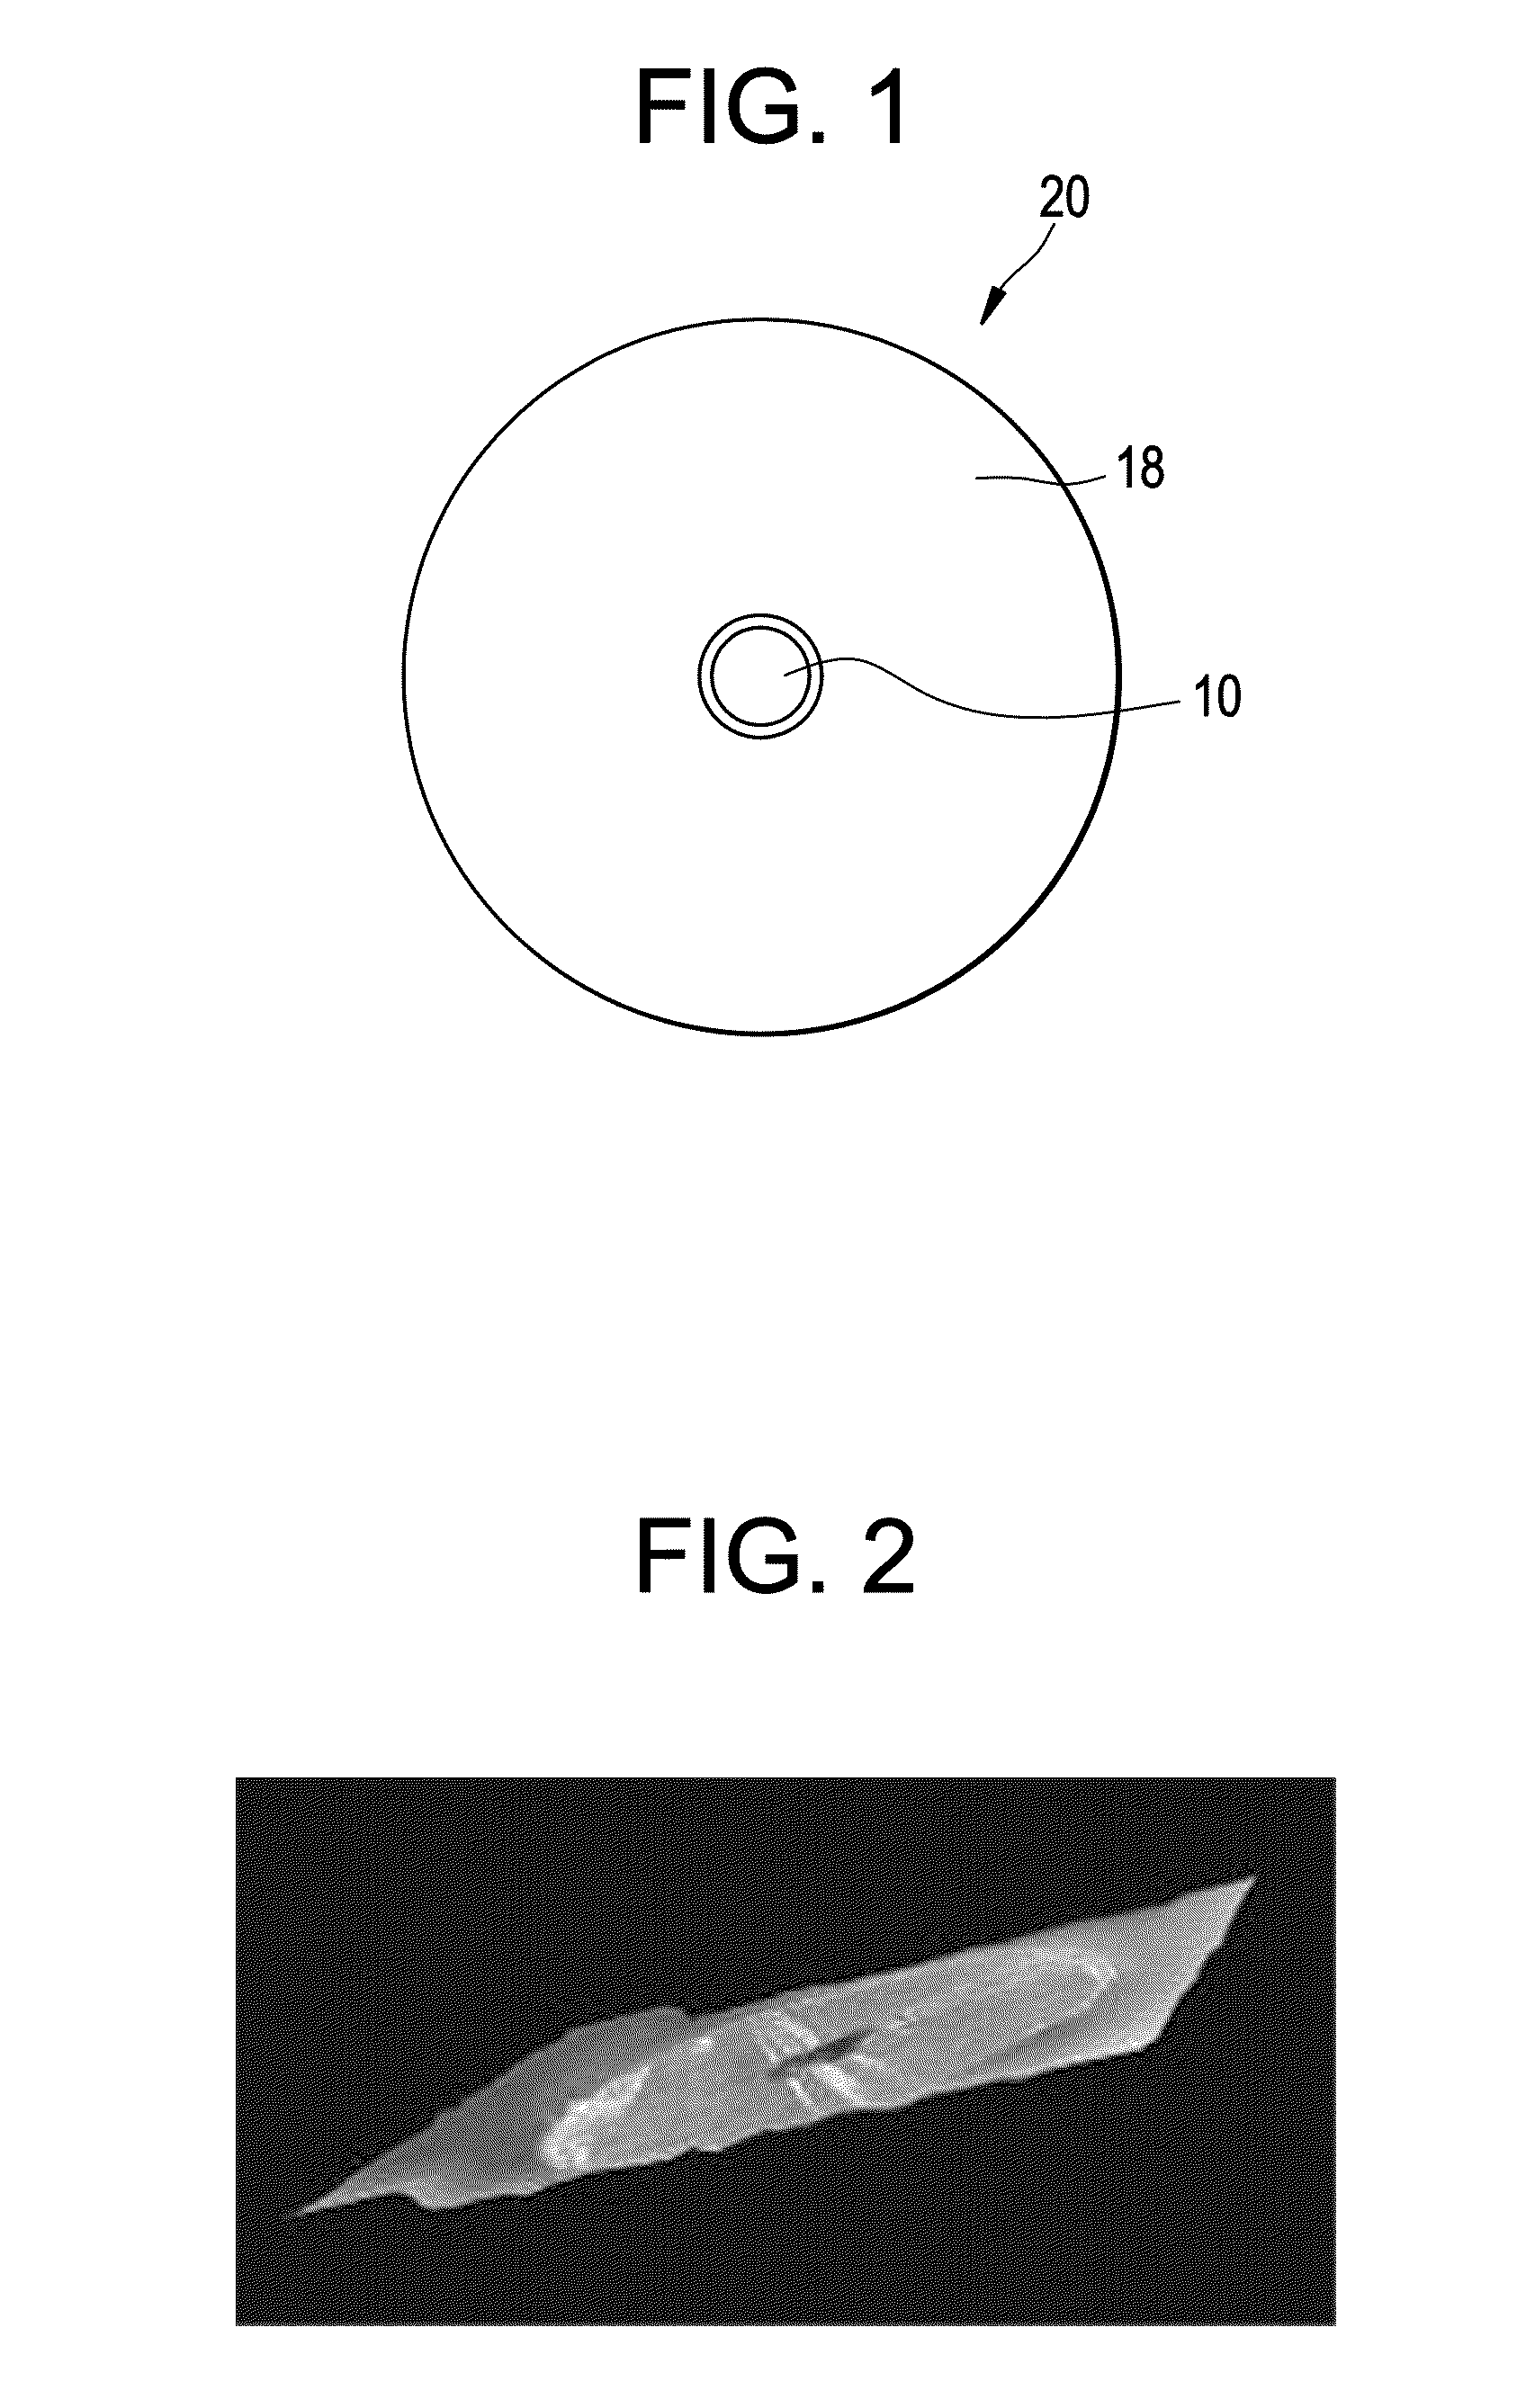 Fiber optic connectors and ferrules and methods for using the same